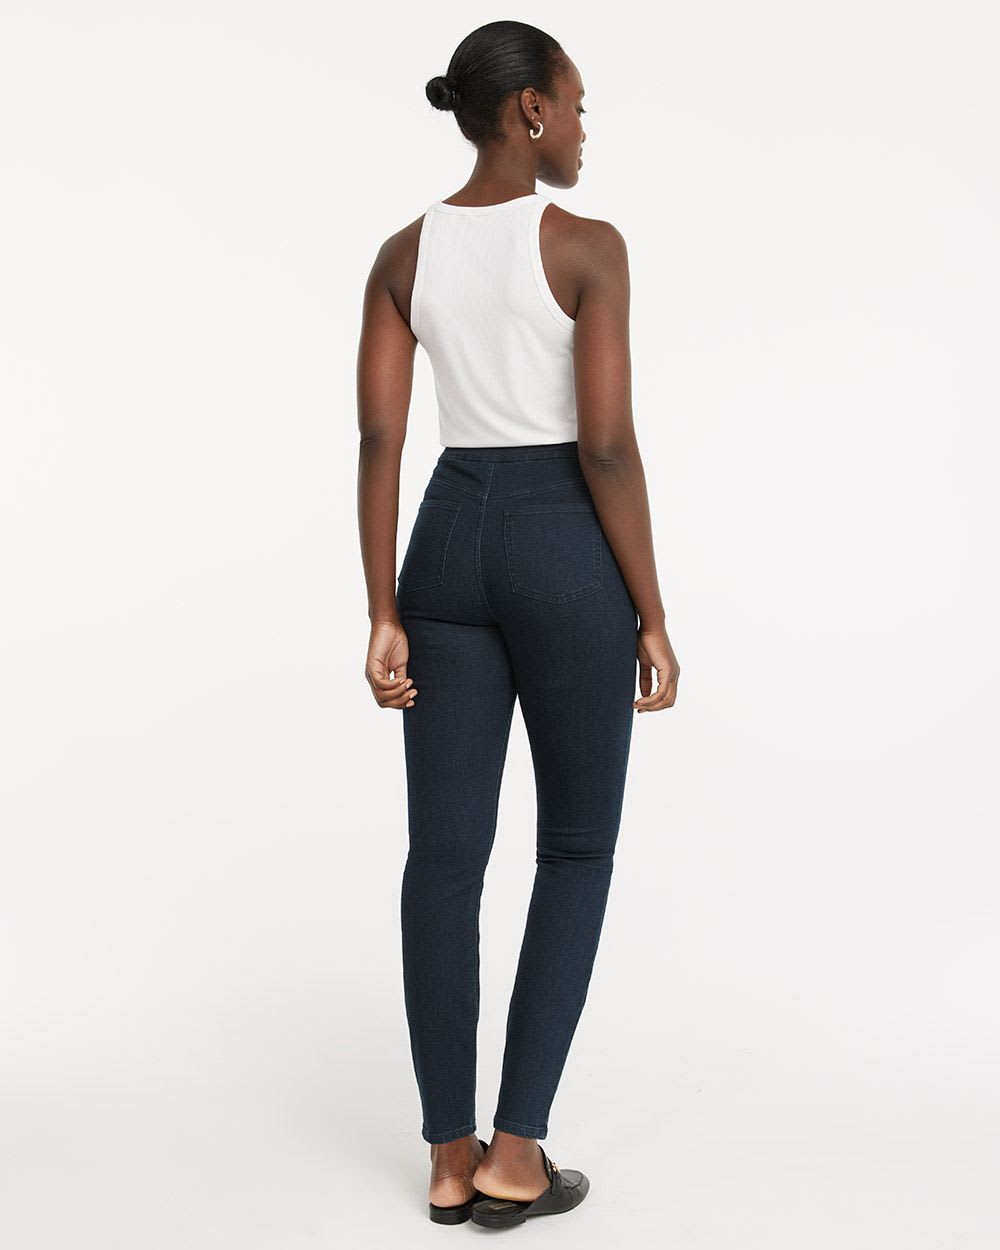 High-Rise Dark Wash Legging with Back Pockets, The Original Comfort - Tall